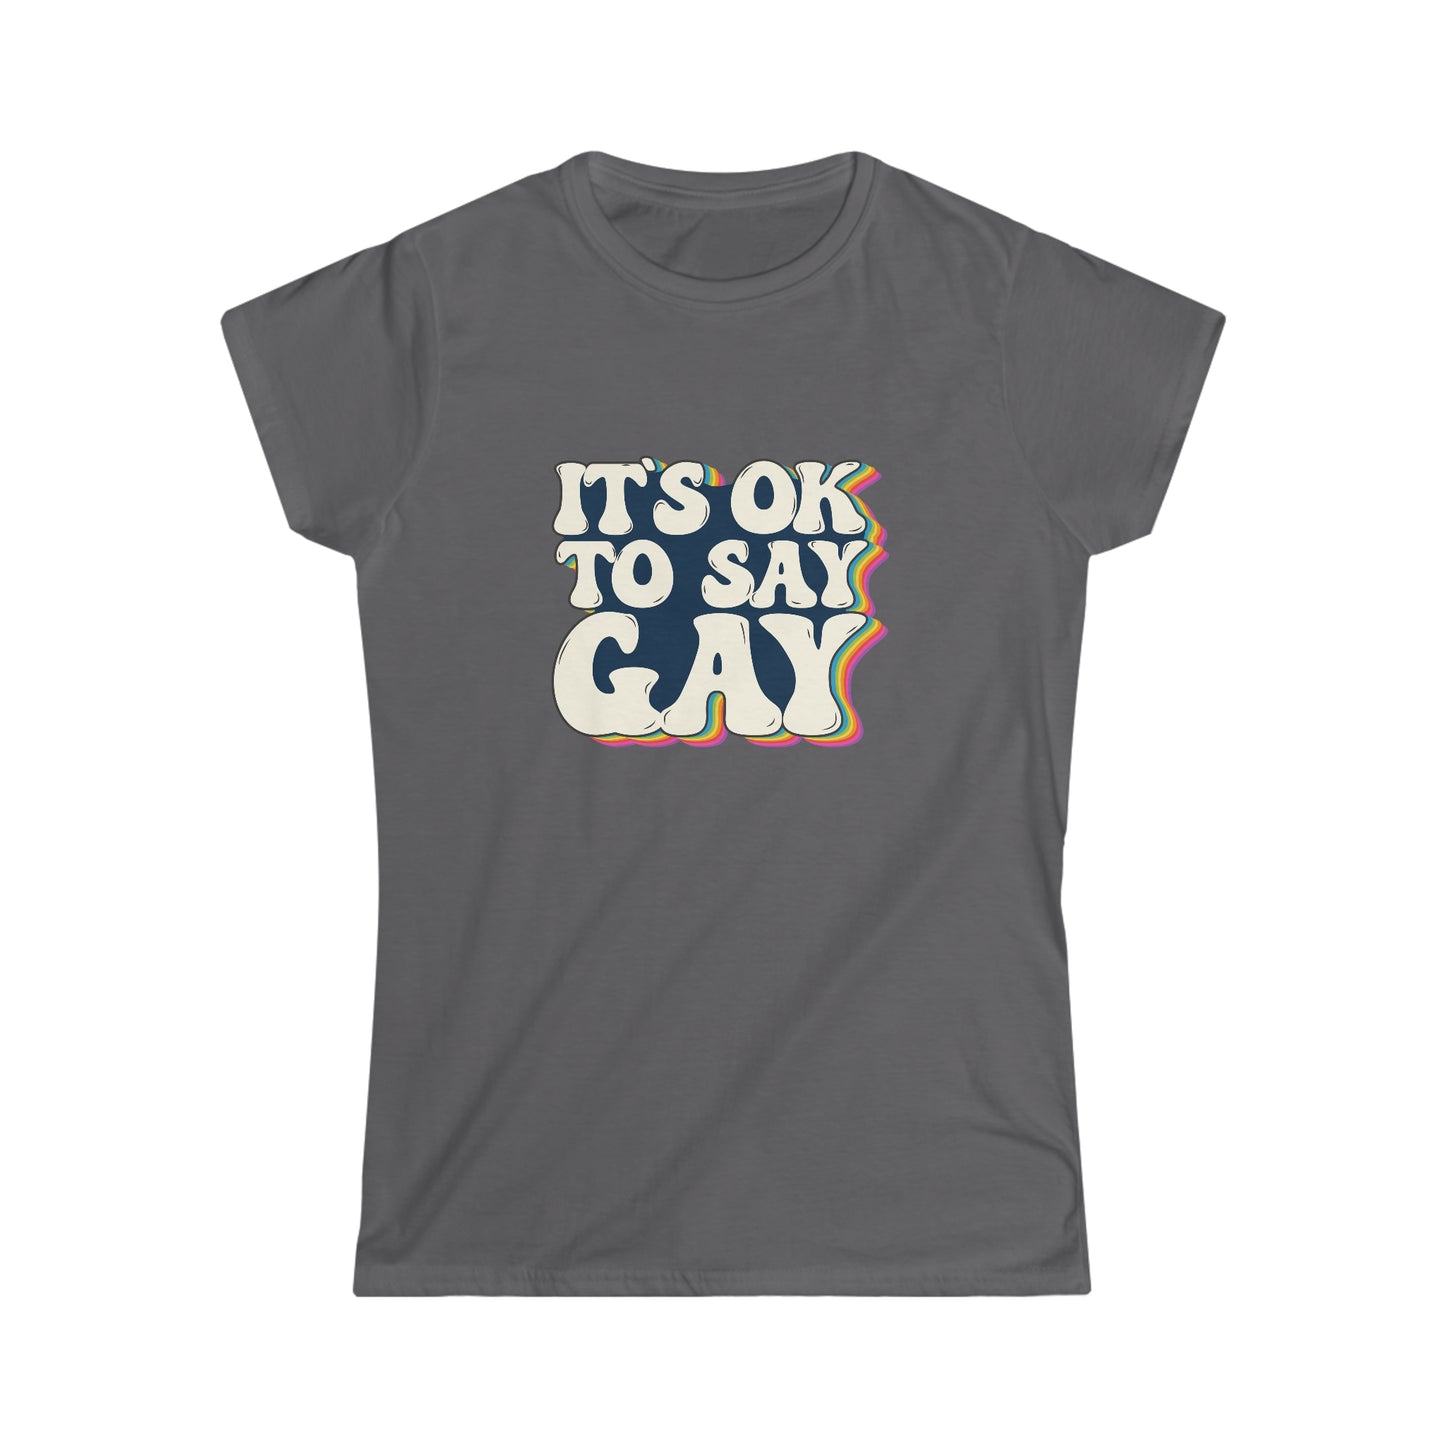 “It’s OK to Say Gay” Women’s T-Shirts